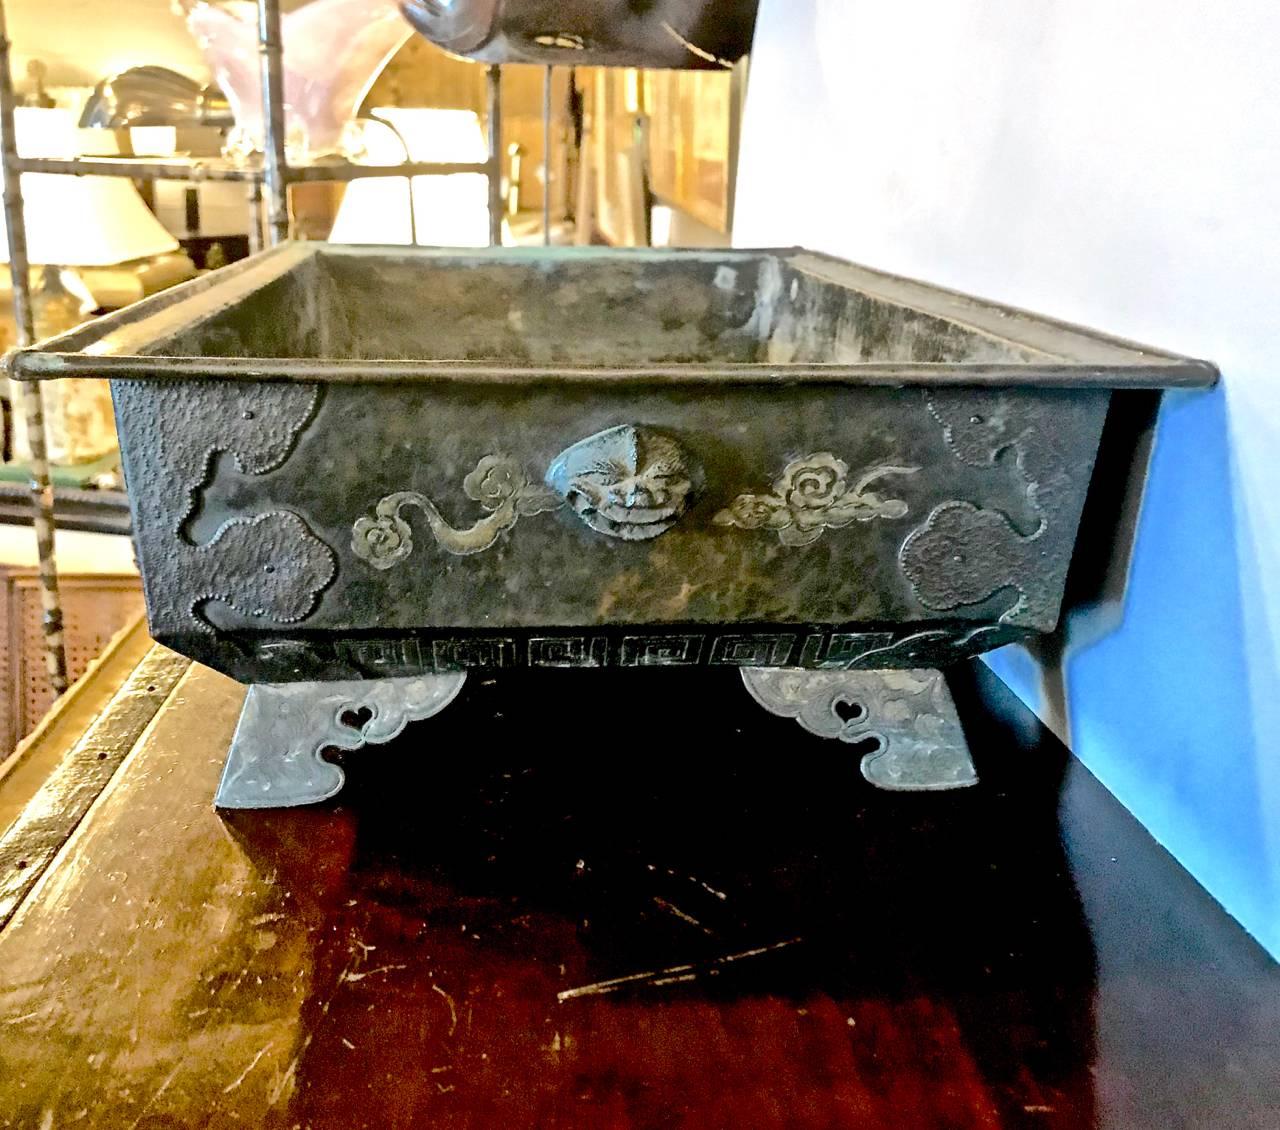 This is a large bronze Hibachi or bulb planter that dates to the later Japanese Edo Period. The bronze hibachi is detailed with applied dragon and flaming pearls, as well as dragon masks to the ends. The rectangular bronze pan is mounted on brass